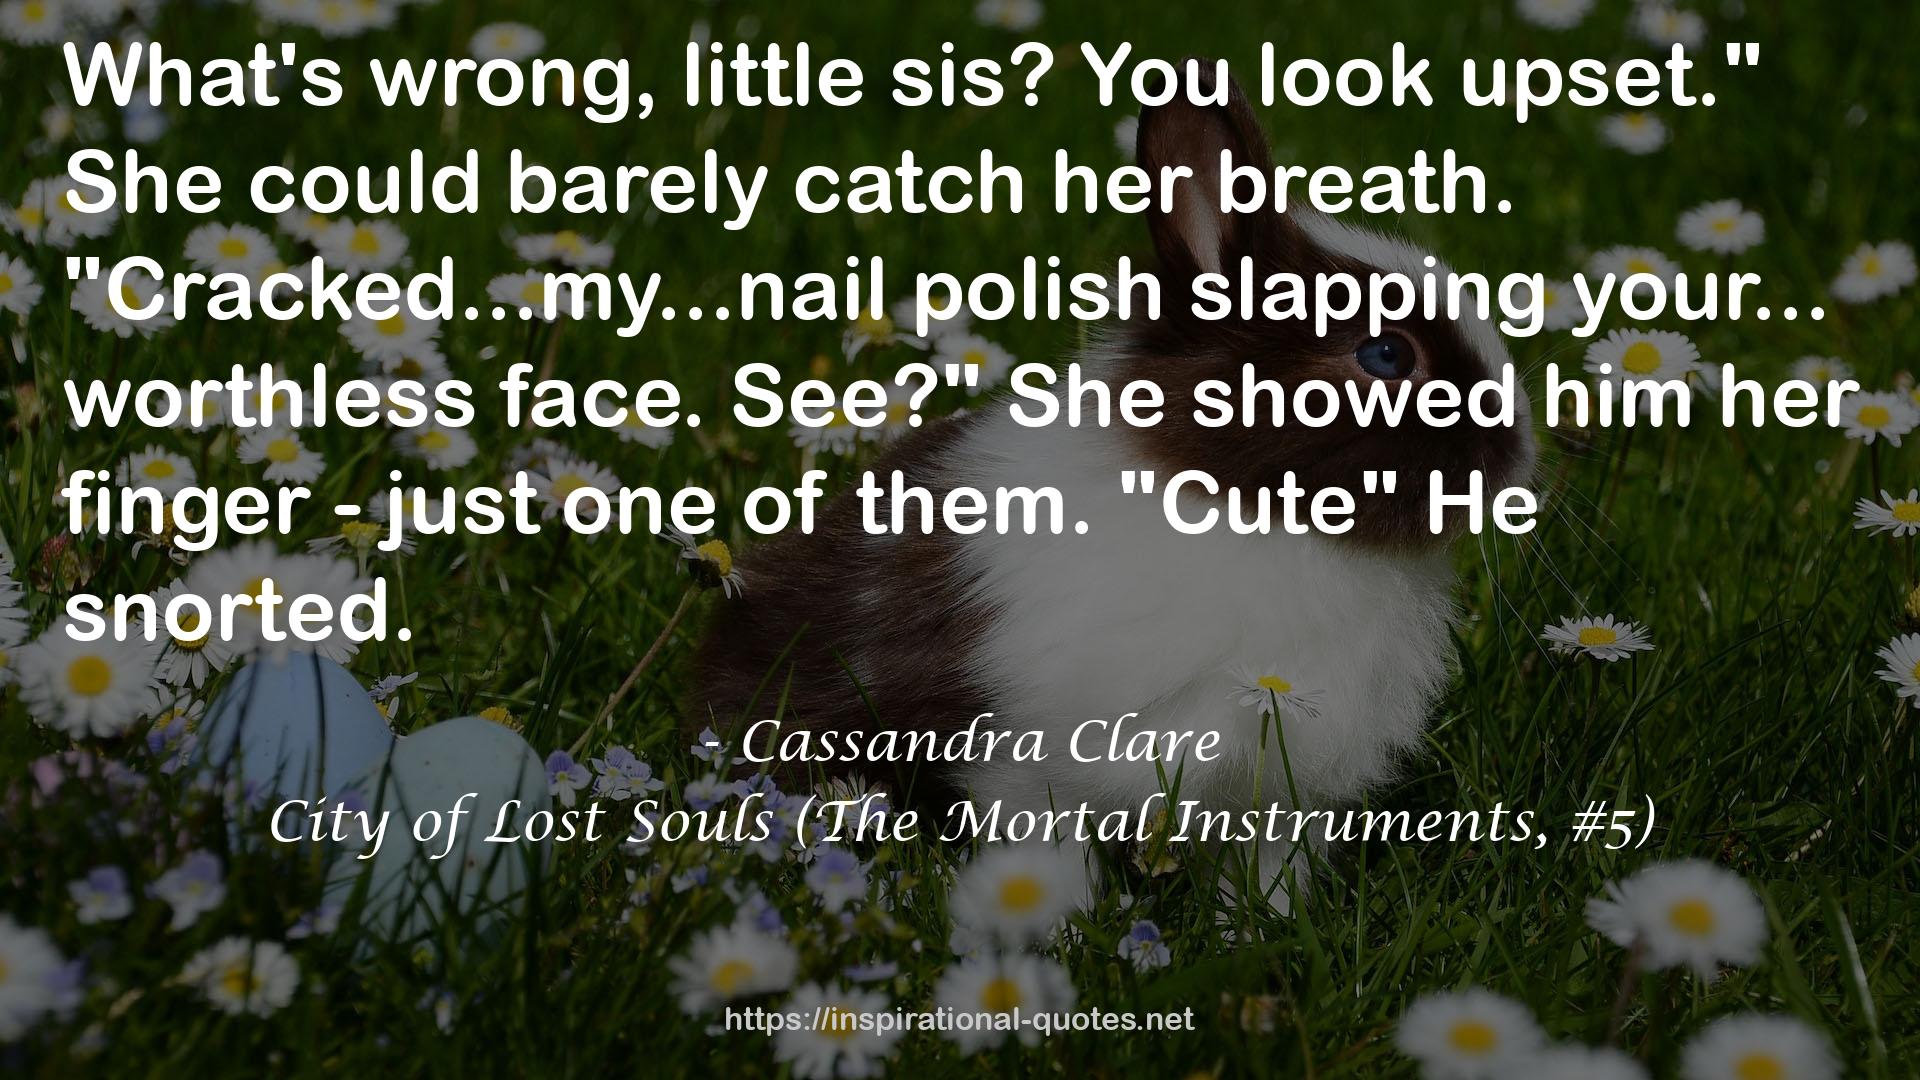 City of Lost Souls (The Mortal Instruments, #5) QUOTES